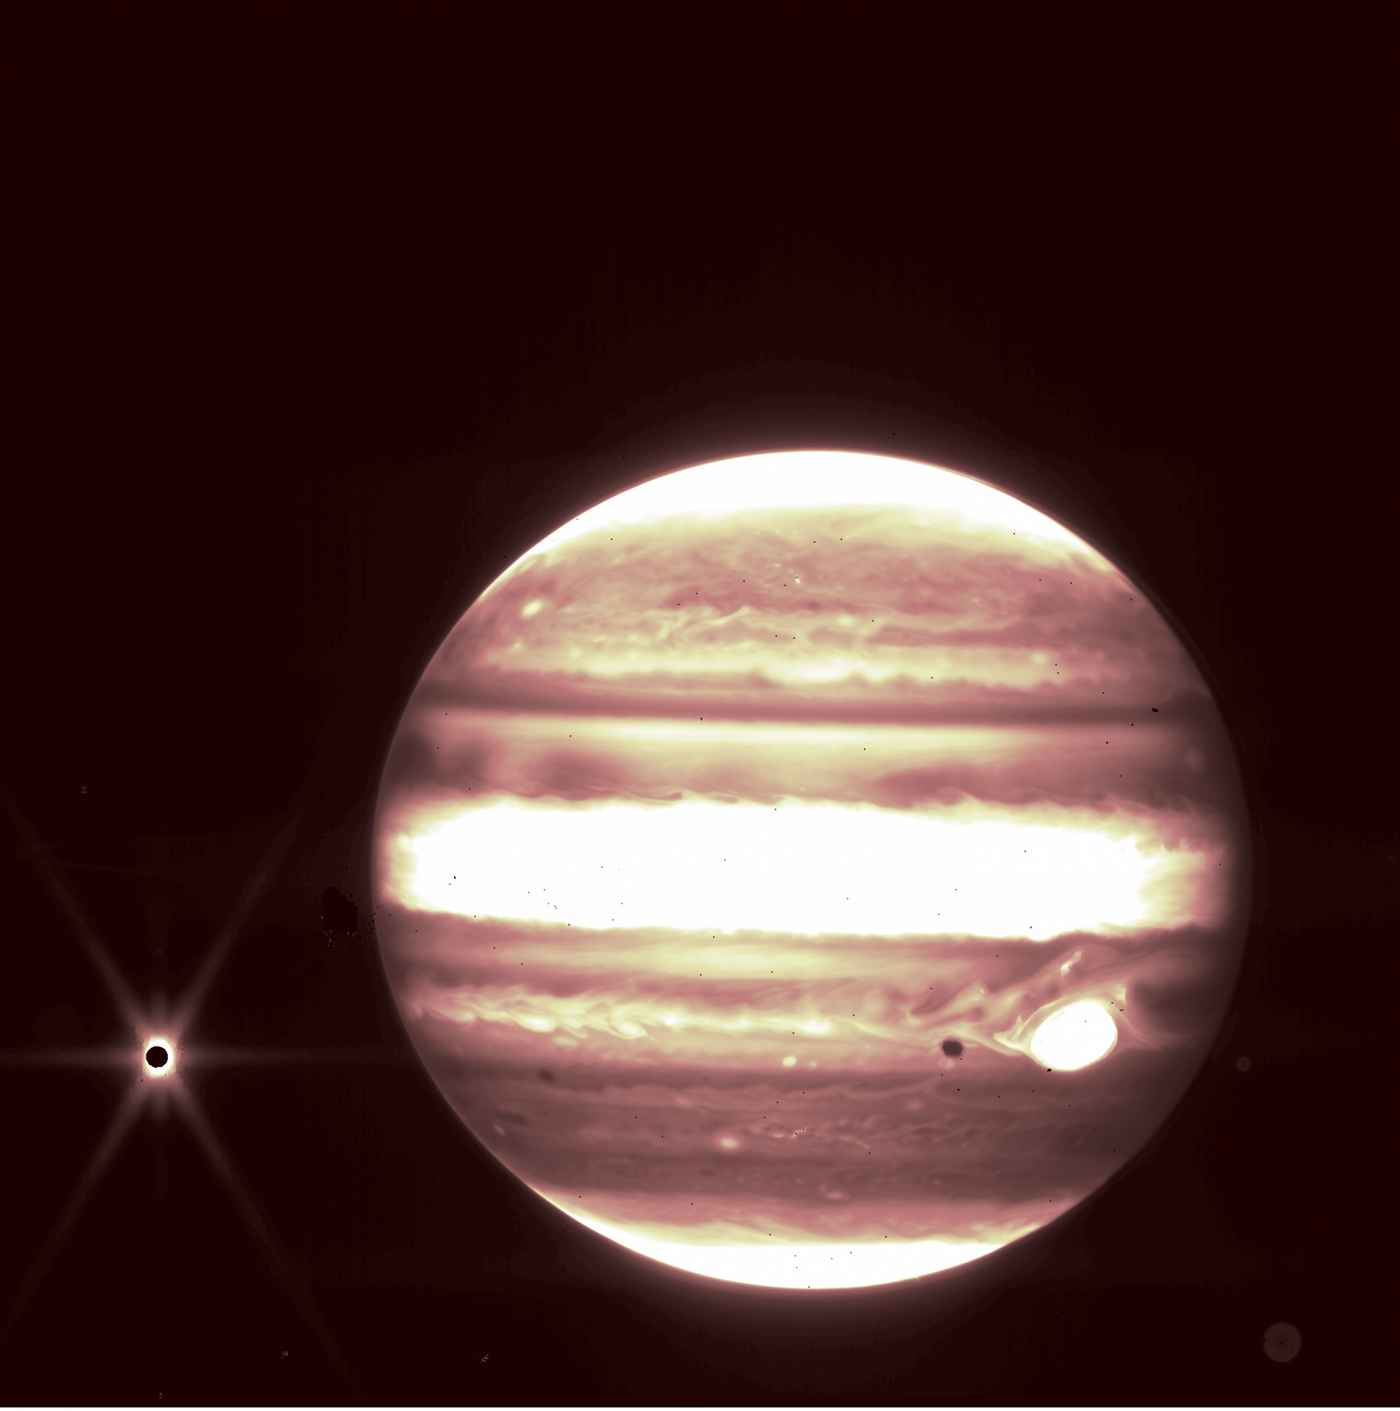 A 2.12 micron image of Jupiter (right) and its moon Europa (left) obtained by the James Webb Space Telescope. Credit: NASA, ESA, CSA, B. Holler and J. Stansberry (STScI)